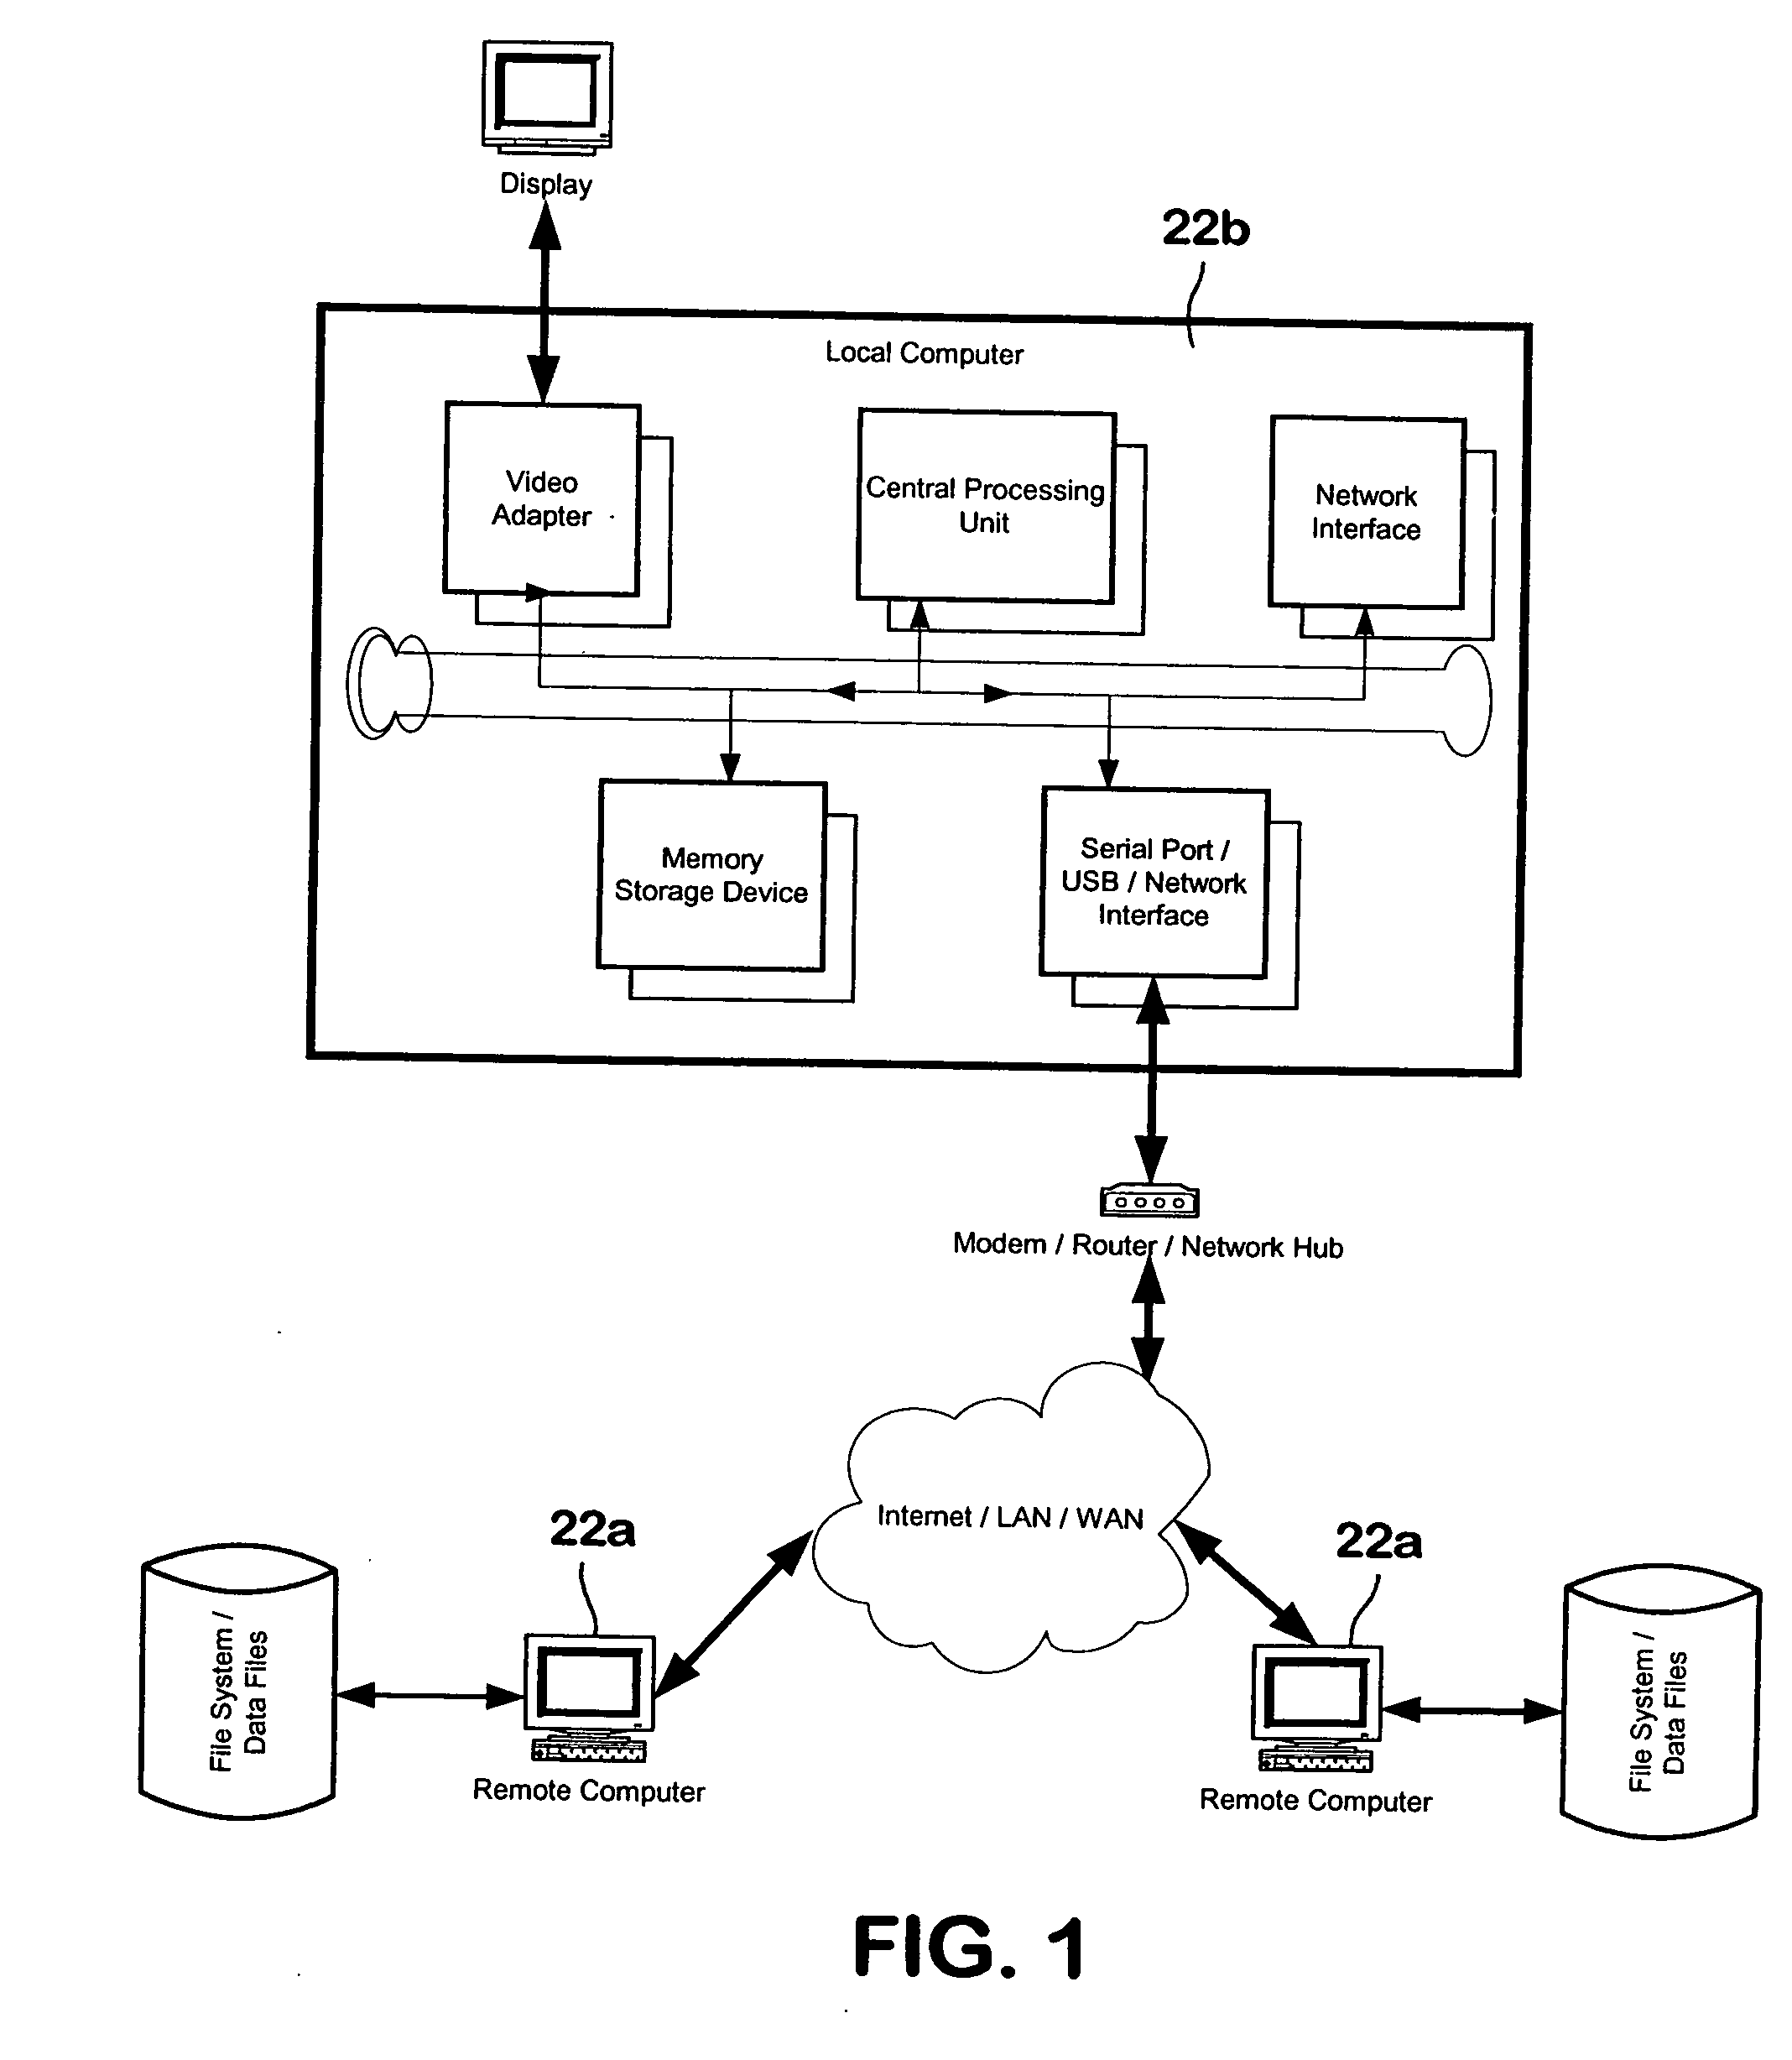 System and method for generating and maintaining software code